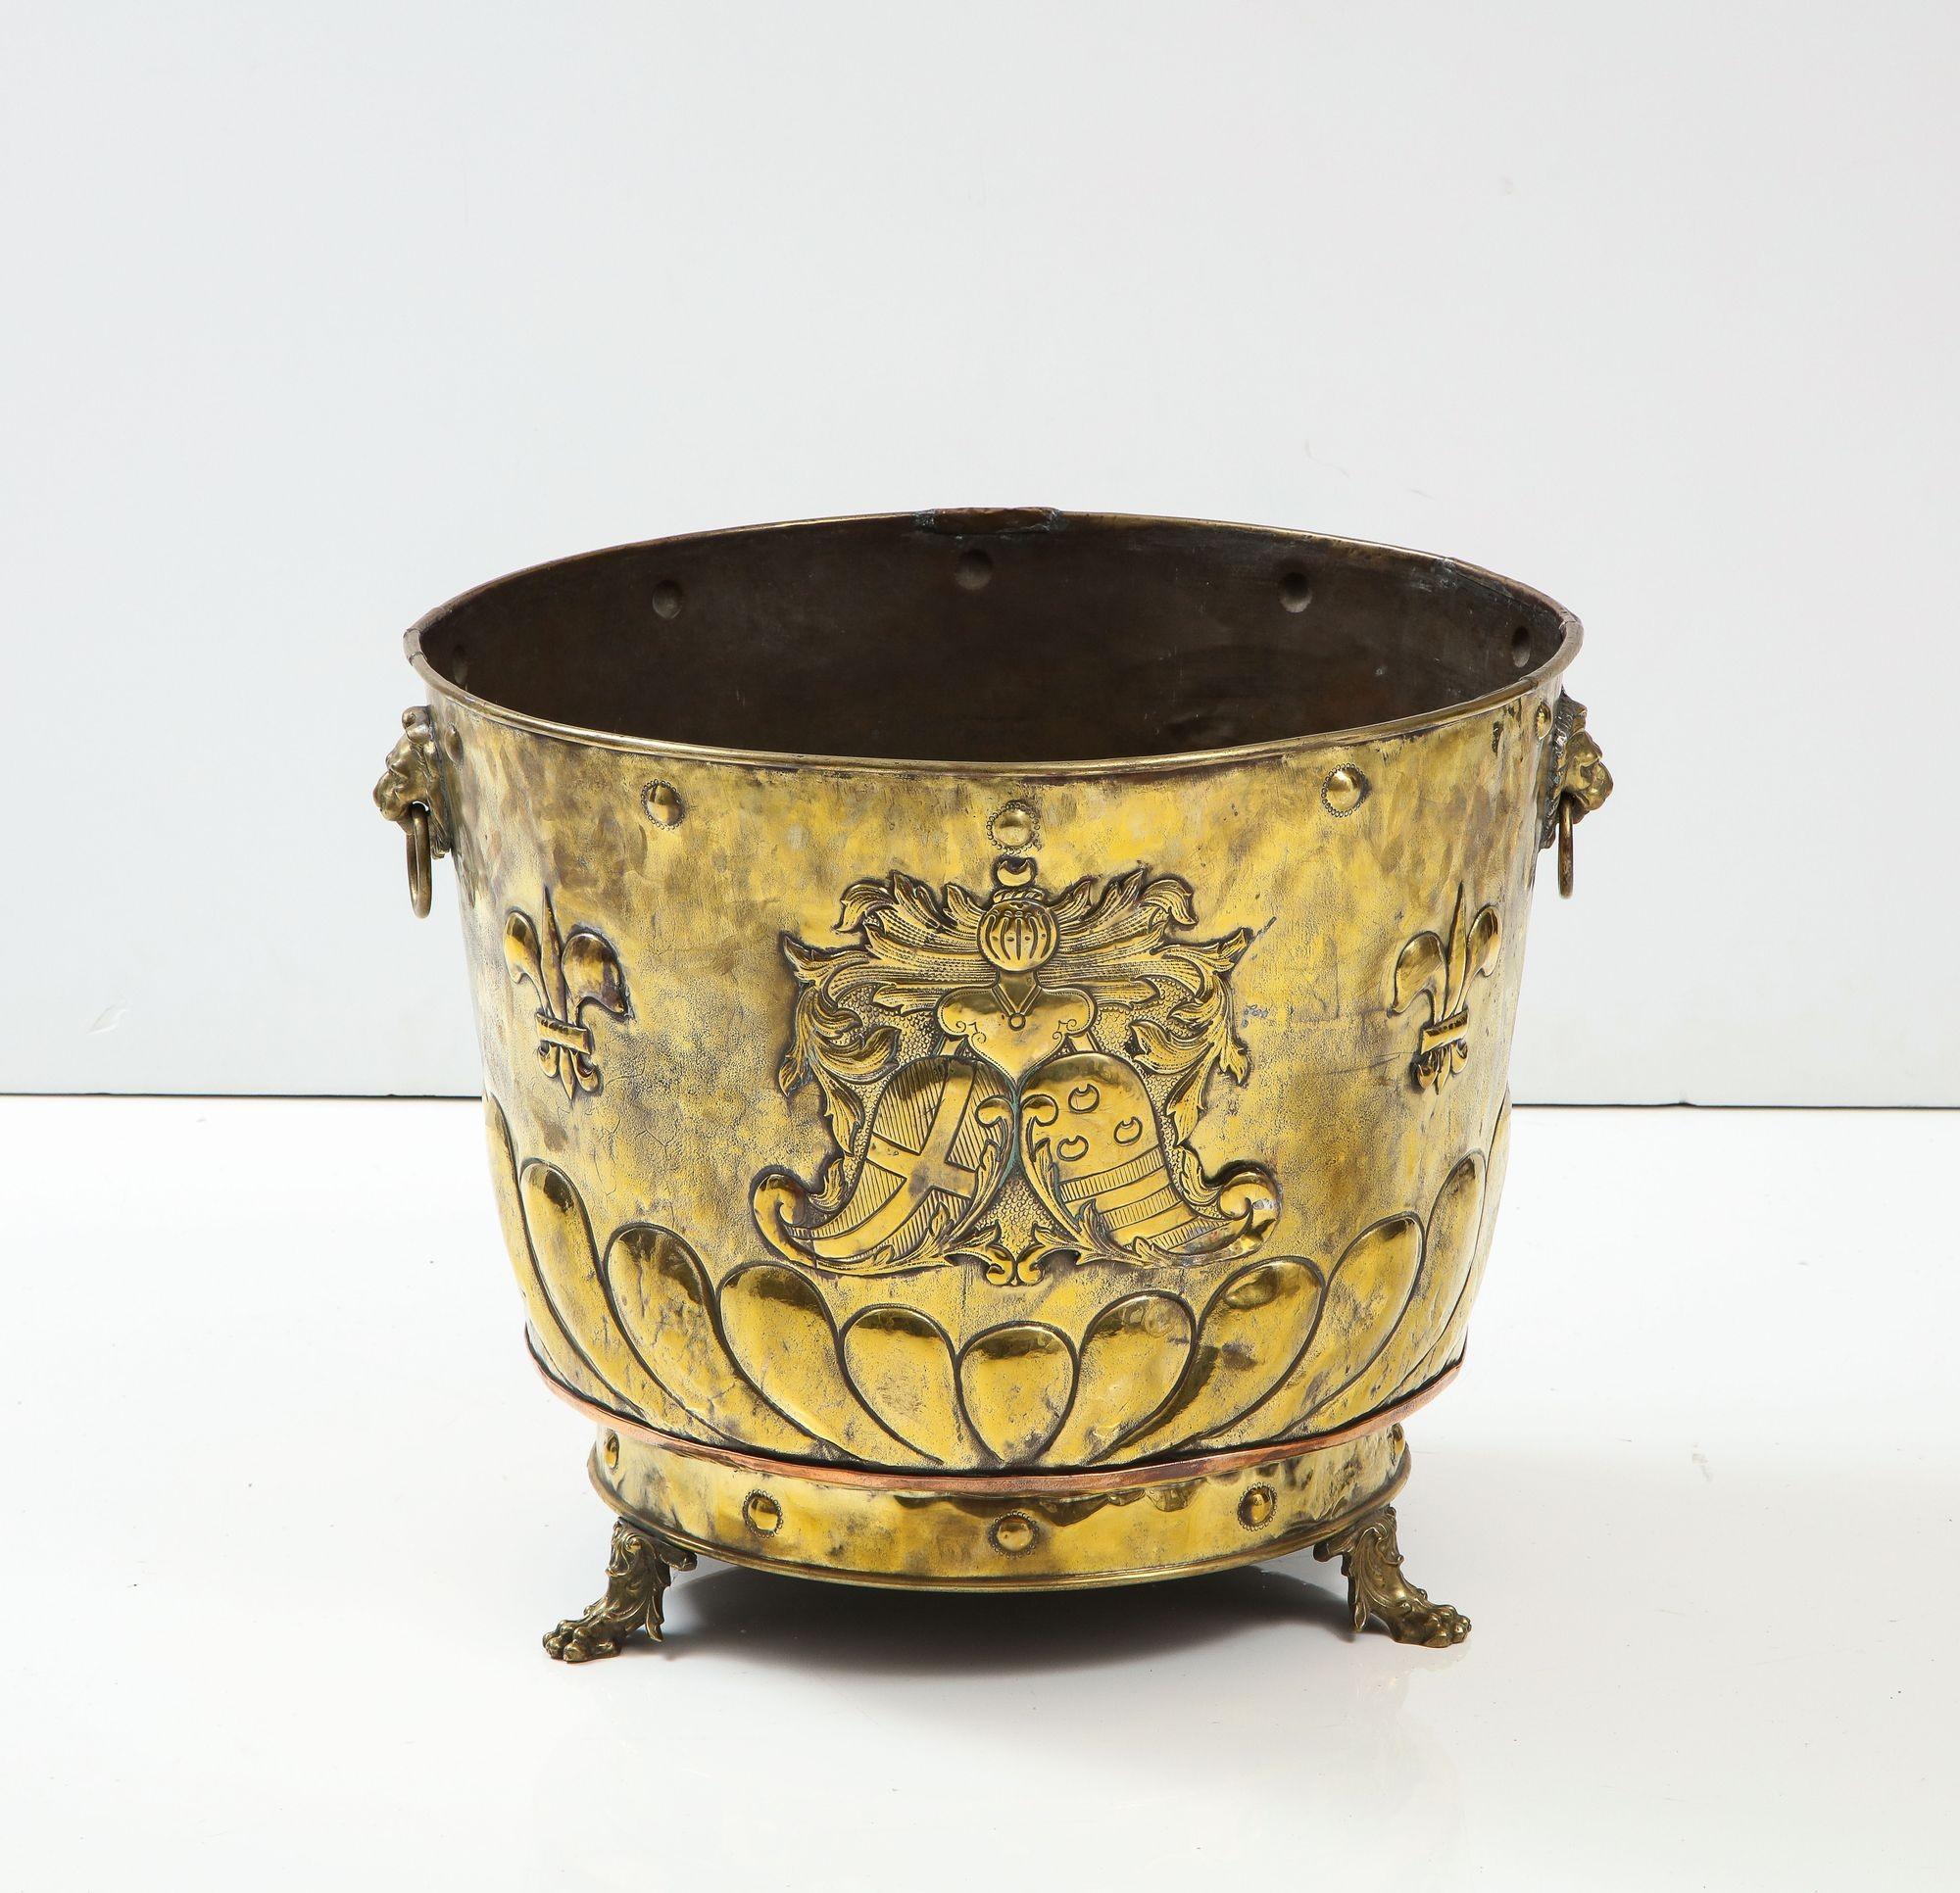 A large brass cauldron with repousee coat of arms, flower display and fleur-de-lys above button decorated lower rim with elaborately cast paw feet, having rolled top rim lion head mask handle rings to sides. A stunning piece of brass work, and